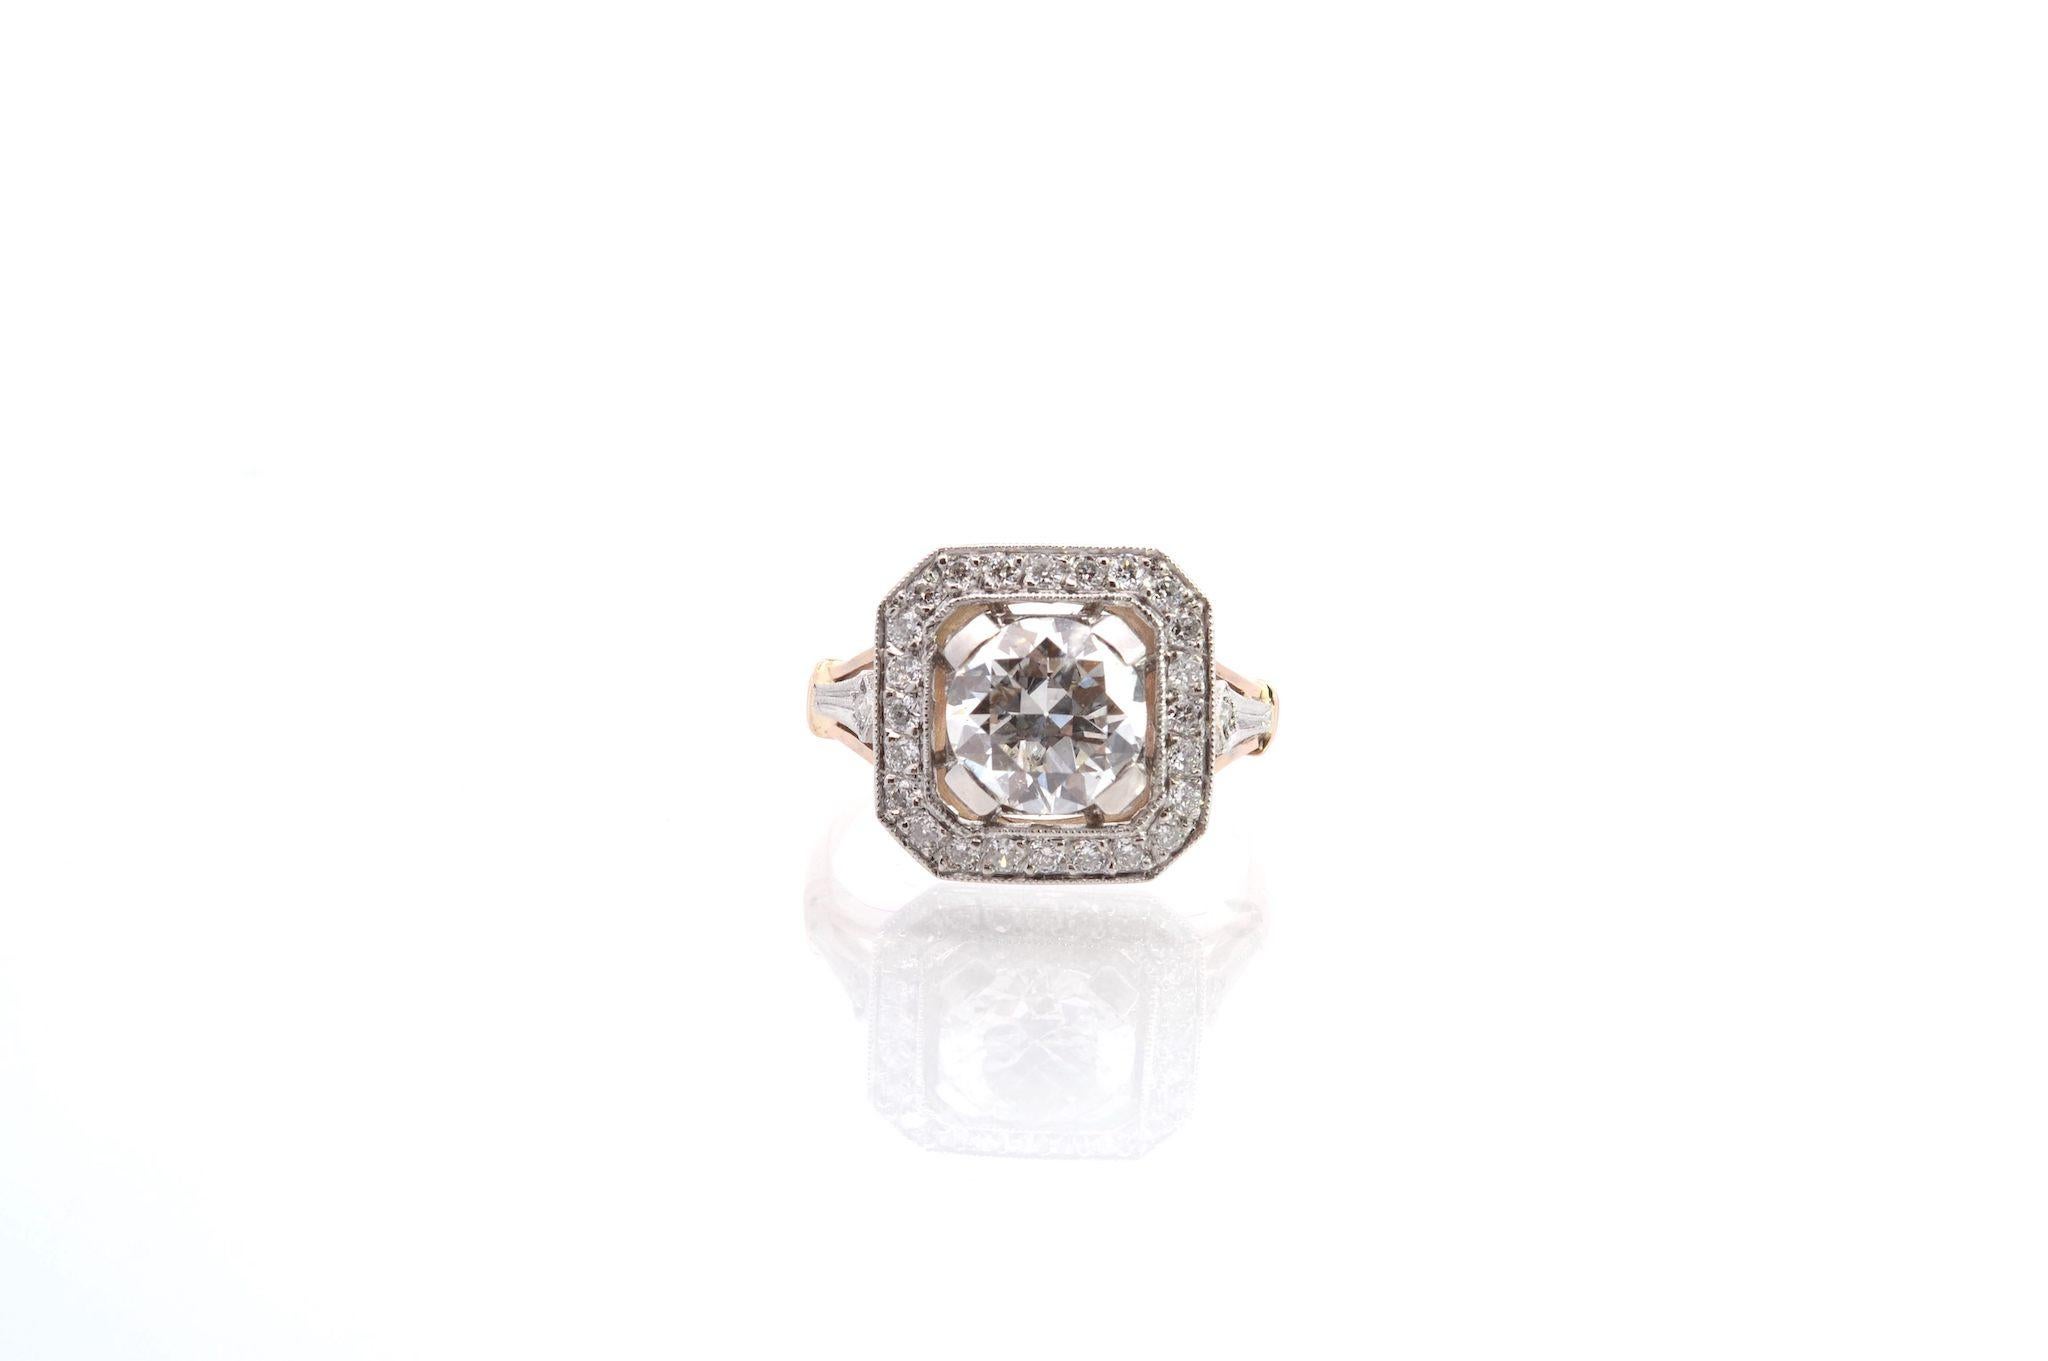 Stones: 1 diamond of 1.57cts G/ P1, 26 diamonds: 0.40ct
Material: Rose gold and platinum
Dimensions: 1.3cm
Weight: 4.4g
Period: Recent in art deco style (handmade)
Size: 53 (free sizing)
Certificate
Ref. : 25155 24988A